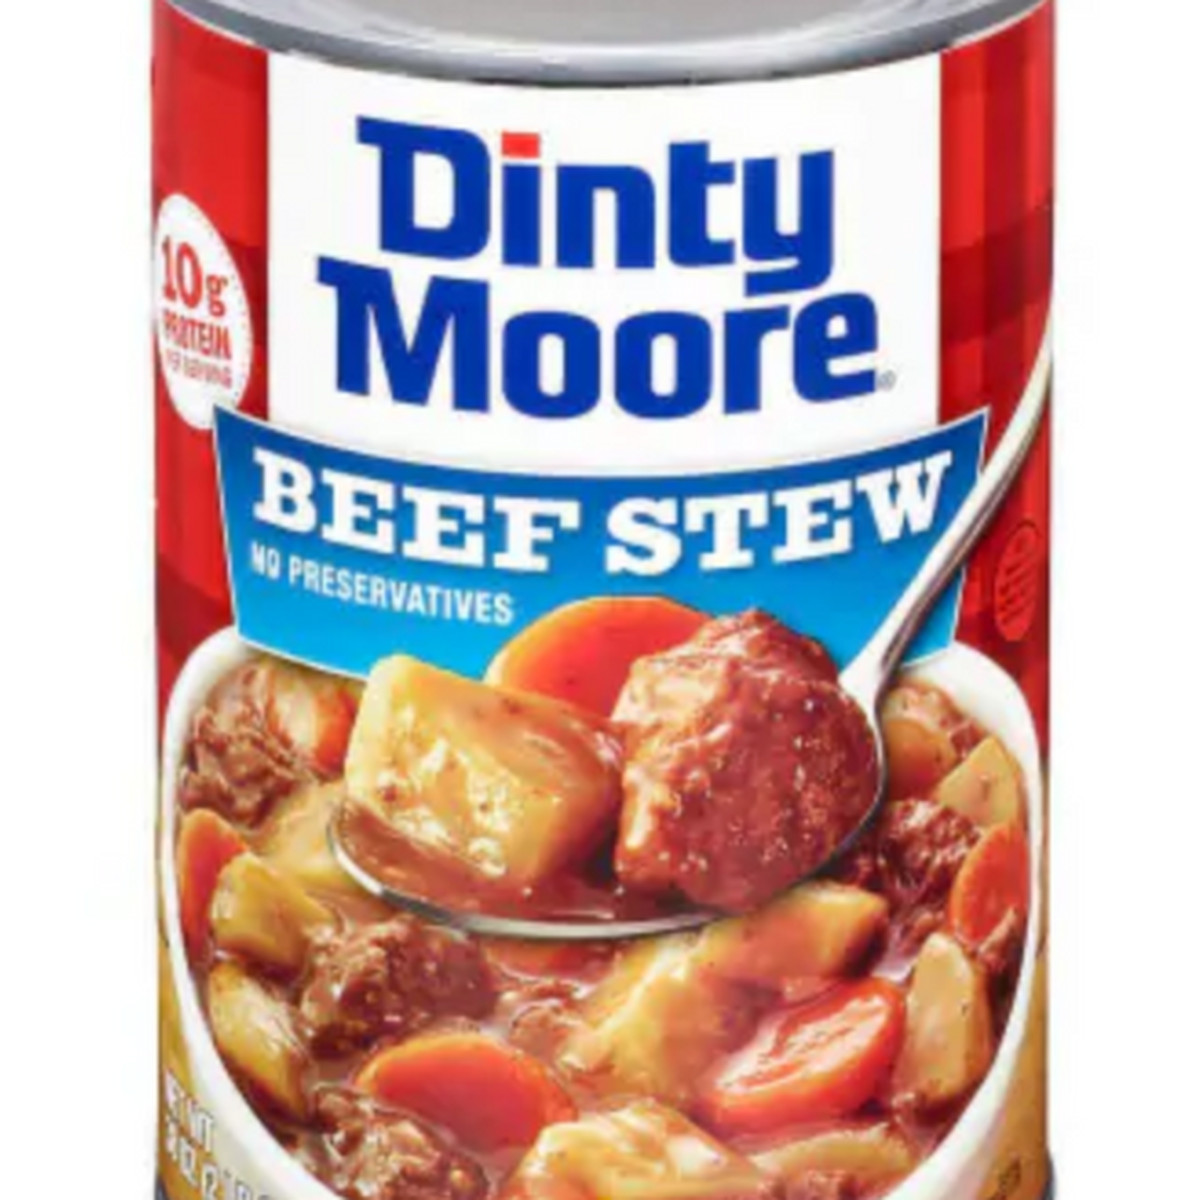 A can of Dinty Moore beef stew